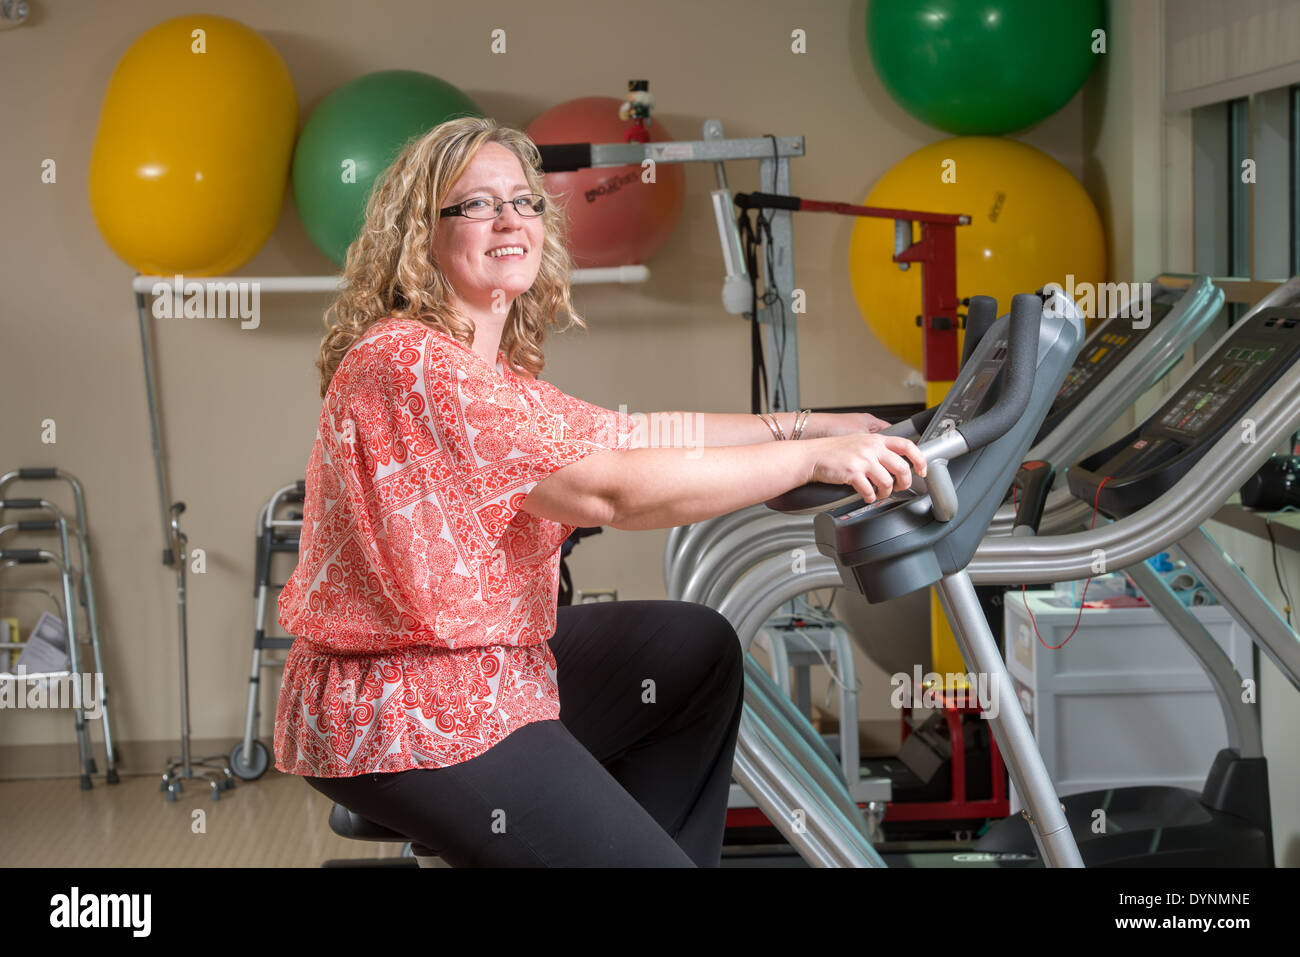 Grateful Patient at rehab, exercising on a stationary bike Bel Air, Maryland Stock Photo